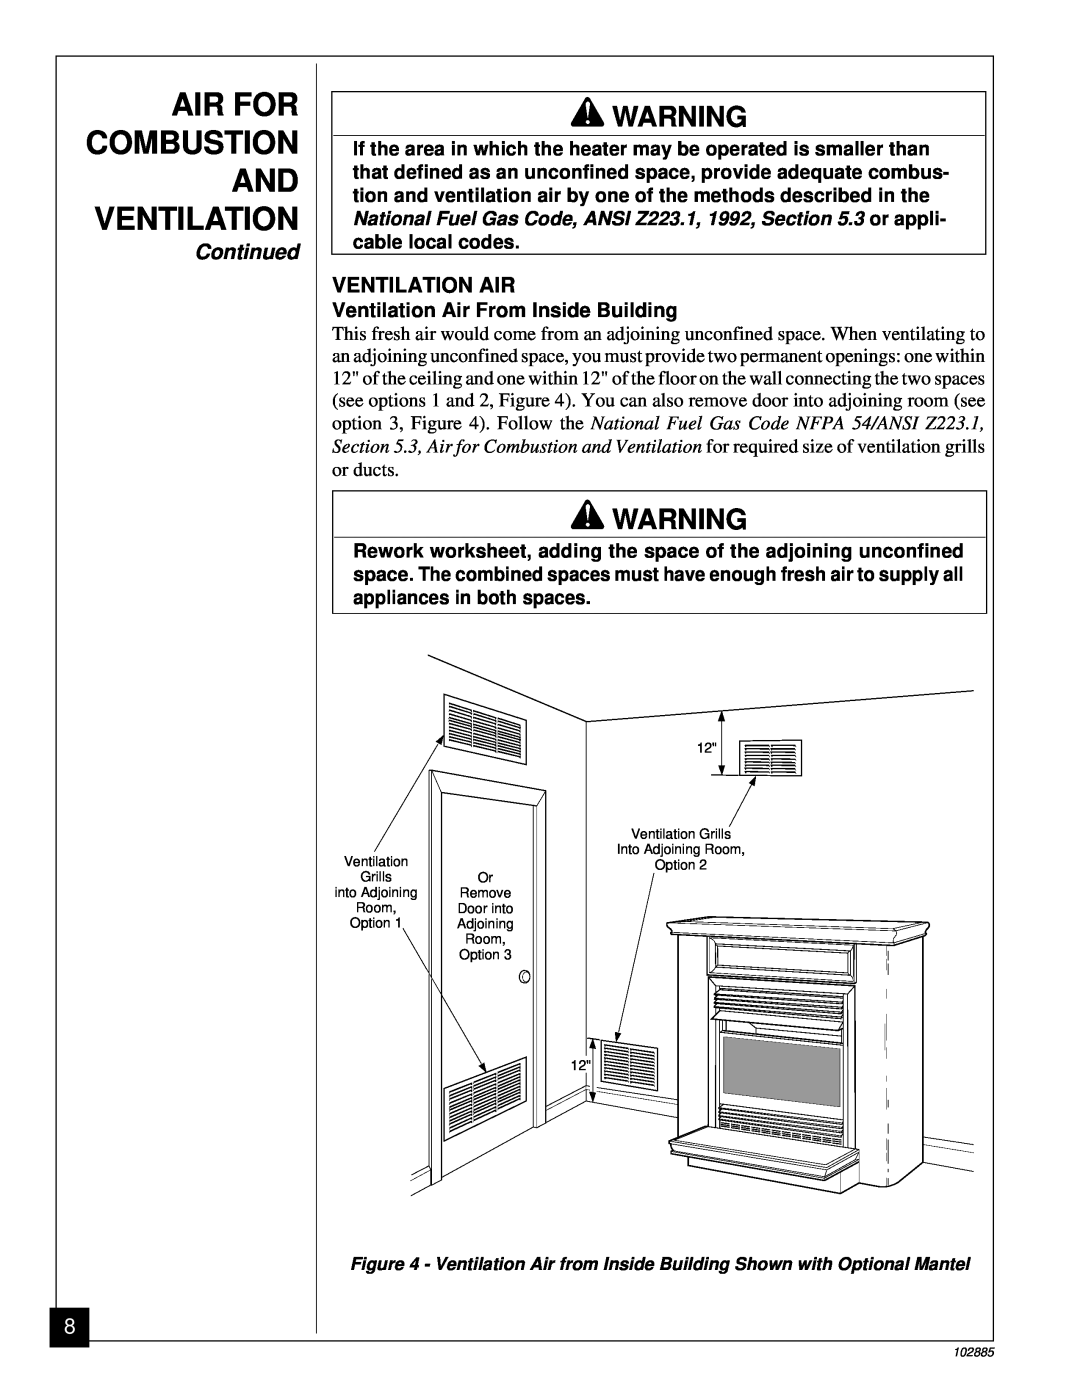 Vanguard Heating VMH26TN installation manual Air For Combustion And Ventilation, Continued, Ventilation Air 